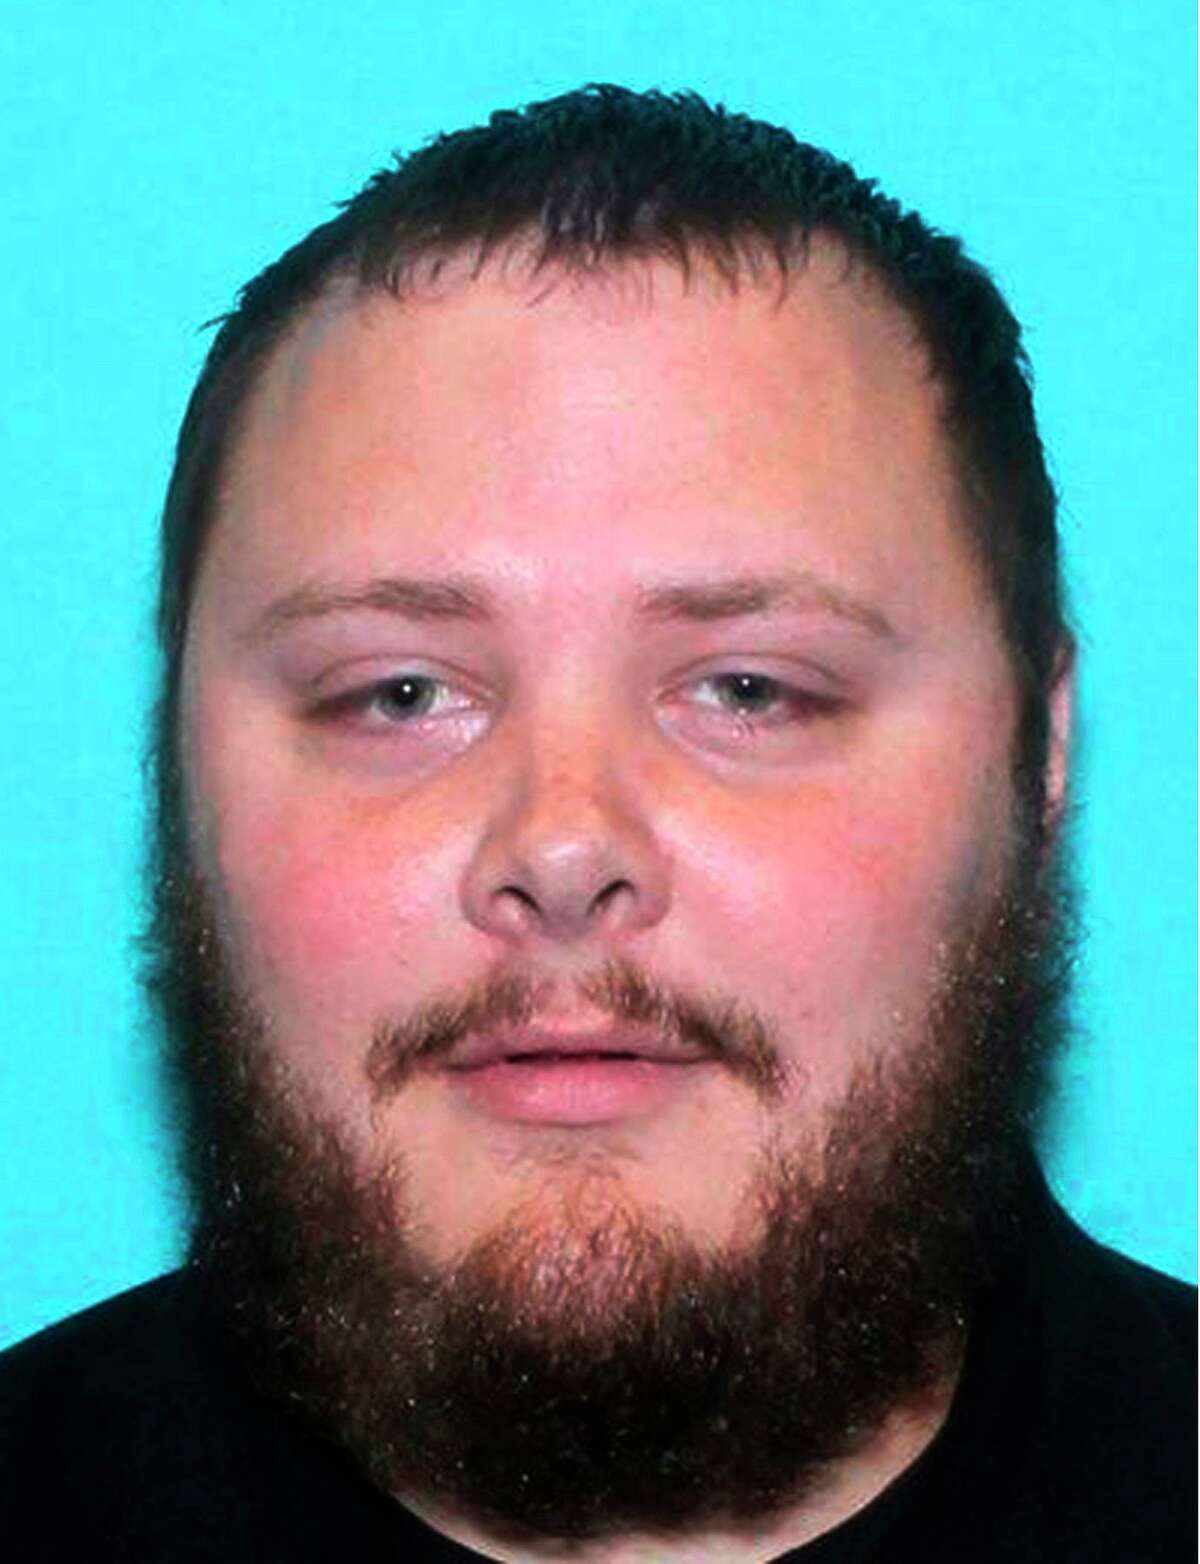 FILE - This undated file photo provided by the Texas Department of Public Safety shows Devin Patrick Kelley.  An autopsy released Thursday, June 28, 2018 by the Travis County Medical Examiner's Office, confirmed that Kelley, who killed more than two dozen people at First Baptist Church in Sutherland Springs, Texas last year, has died from a self-inflicted gunshot wound.  in the head.  (Texas Department of Public Safety via AP, file)